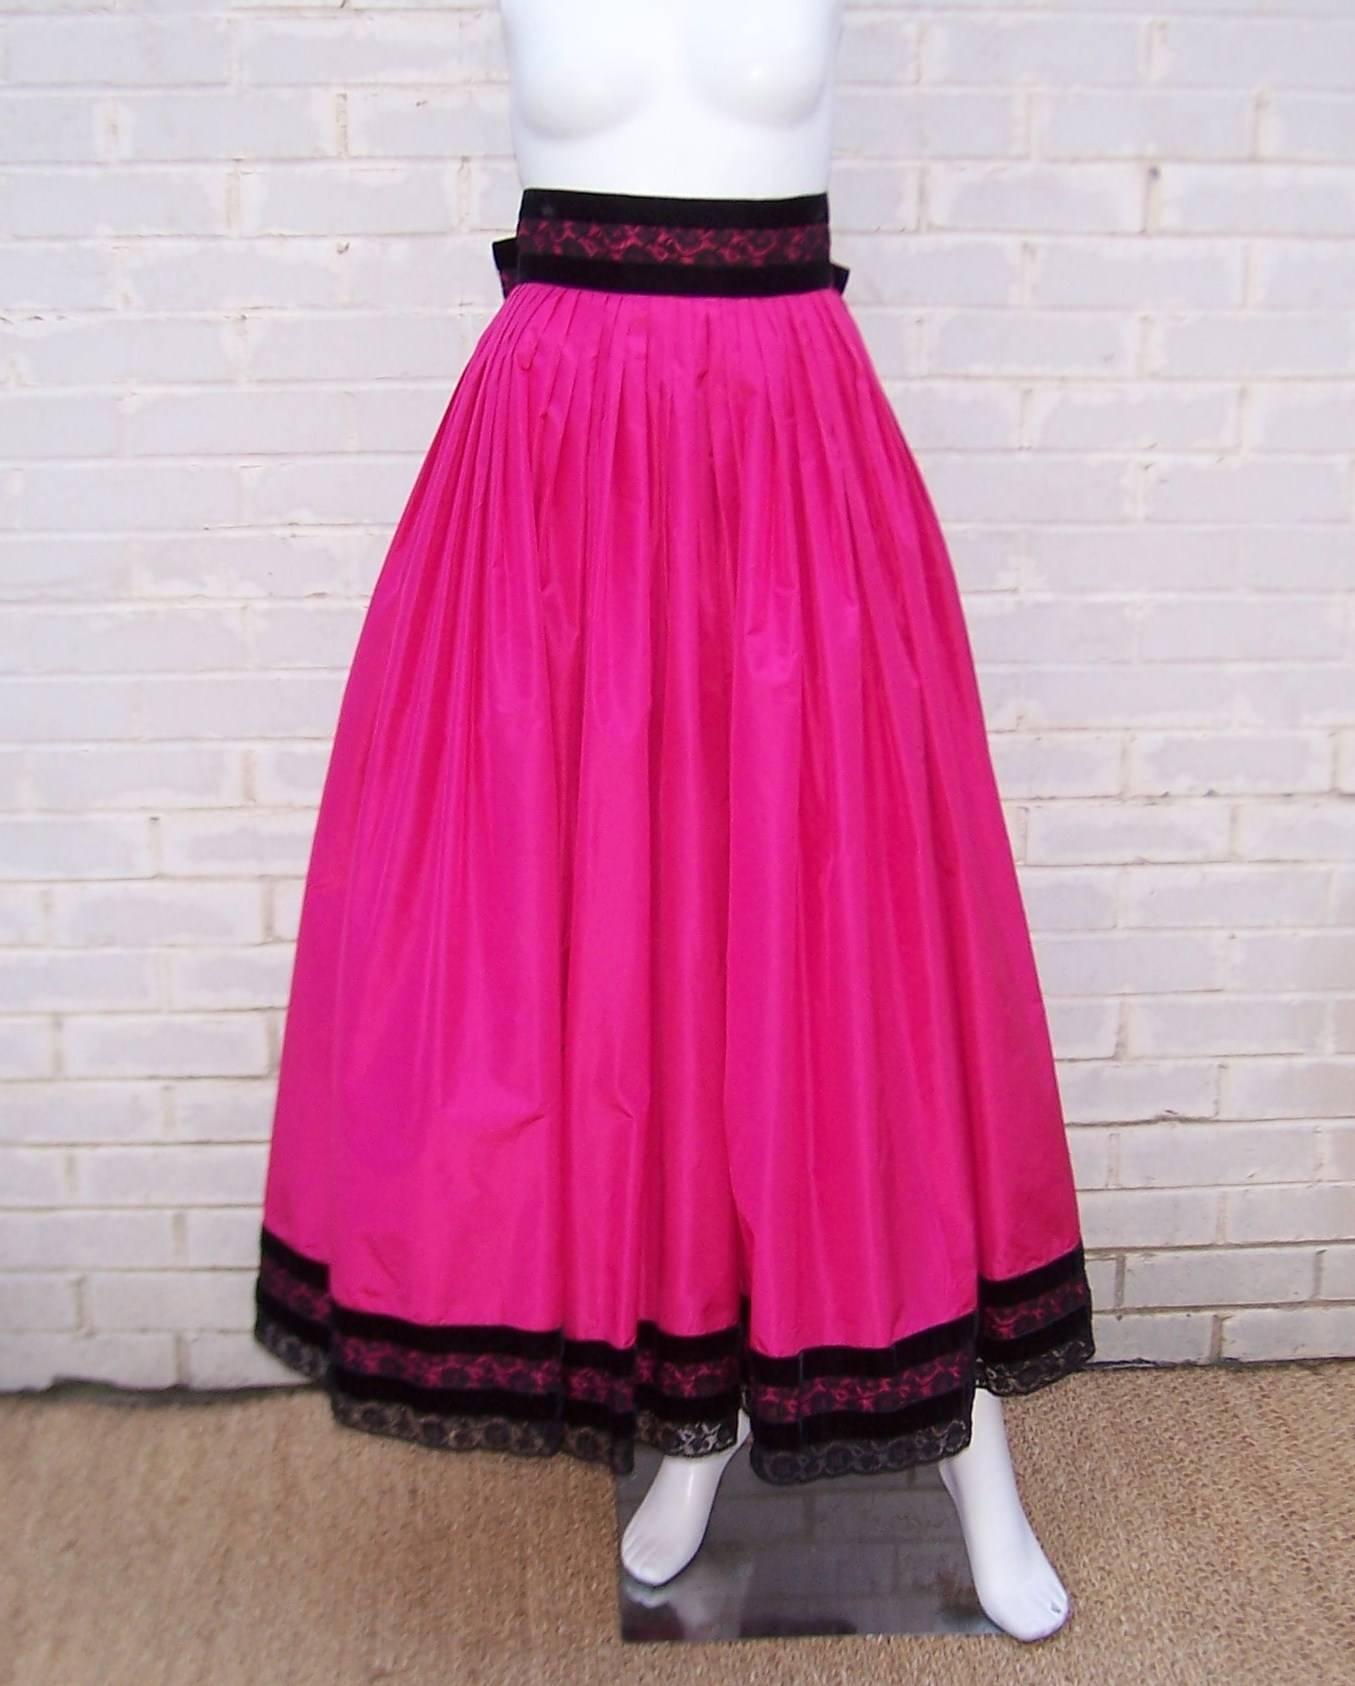 This Miss O by Oscar de la Renta design is fun and girlish with a good dose of beautiful opulence.  A ballroom style full skirt of bright fuchsia silk taffeta is trimmed in black velvet and lace at the waist and hem with a bow at the back to wrap